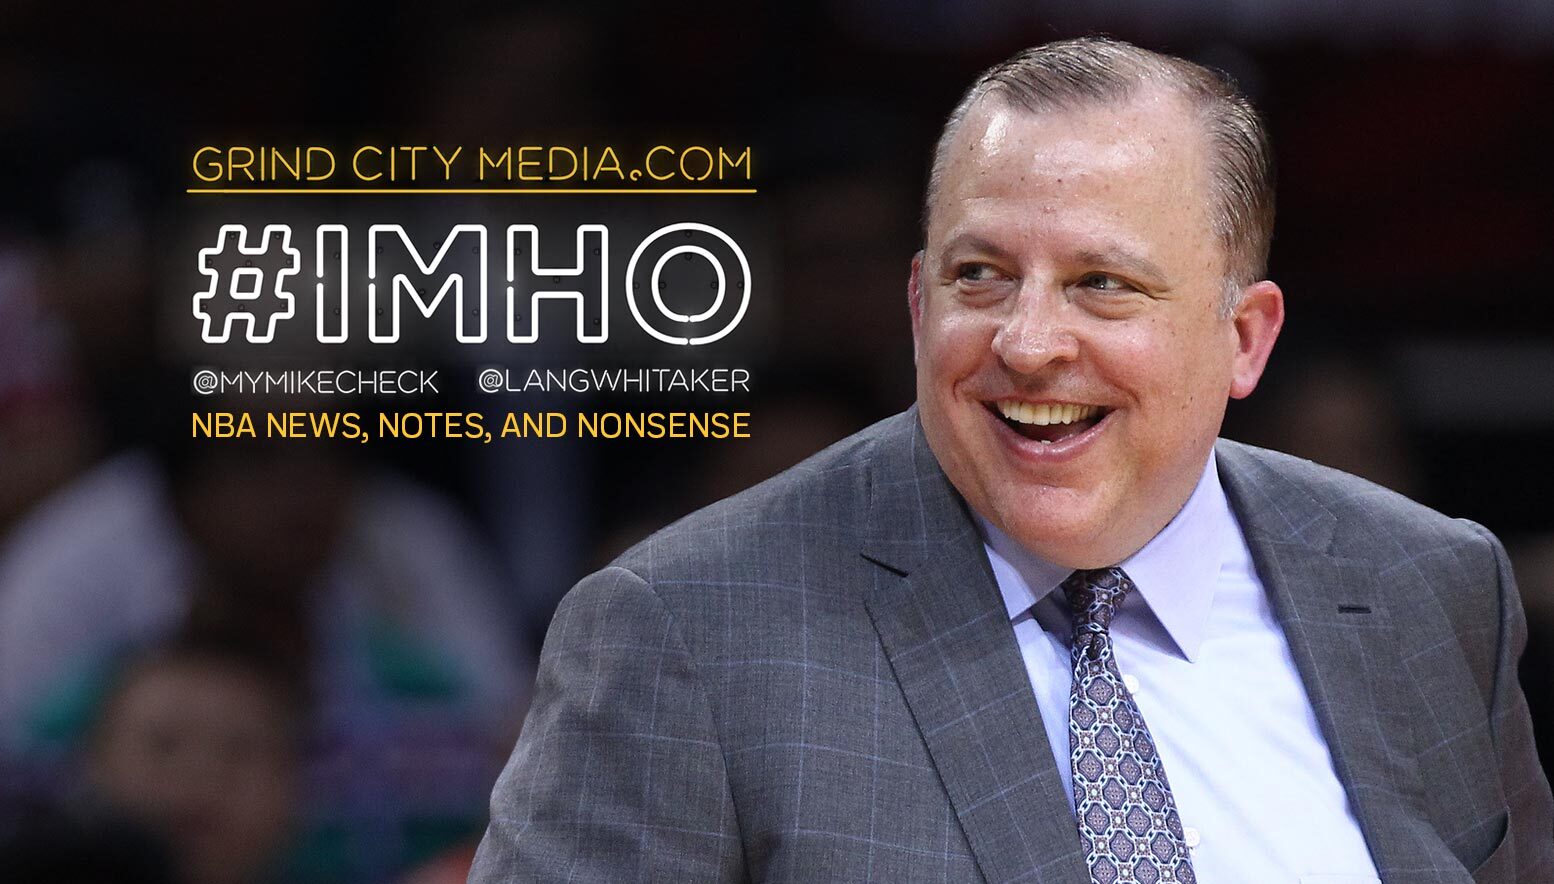 #IMHO: The Return of the NBA? Plus, bringing the noise, and a new coach in New York